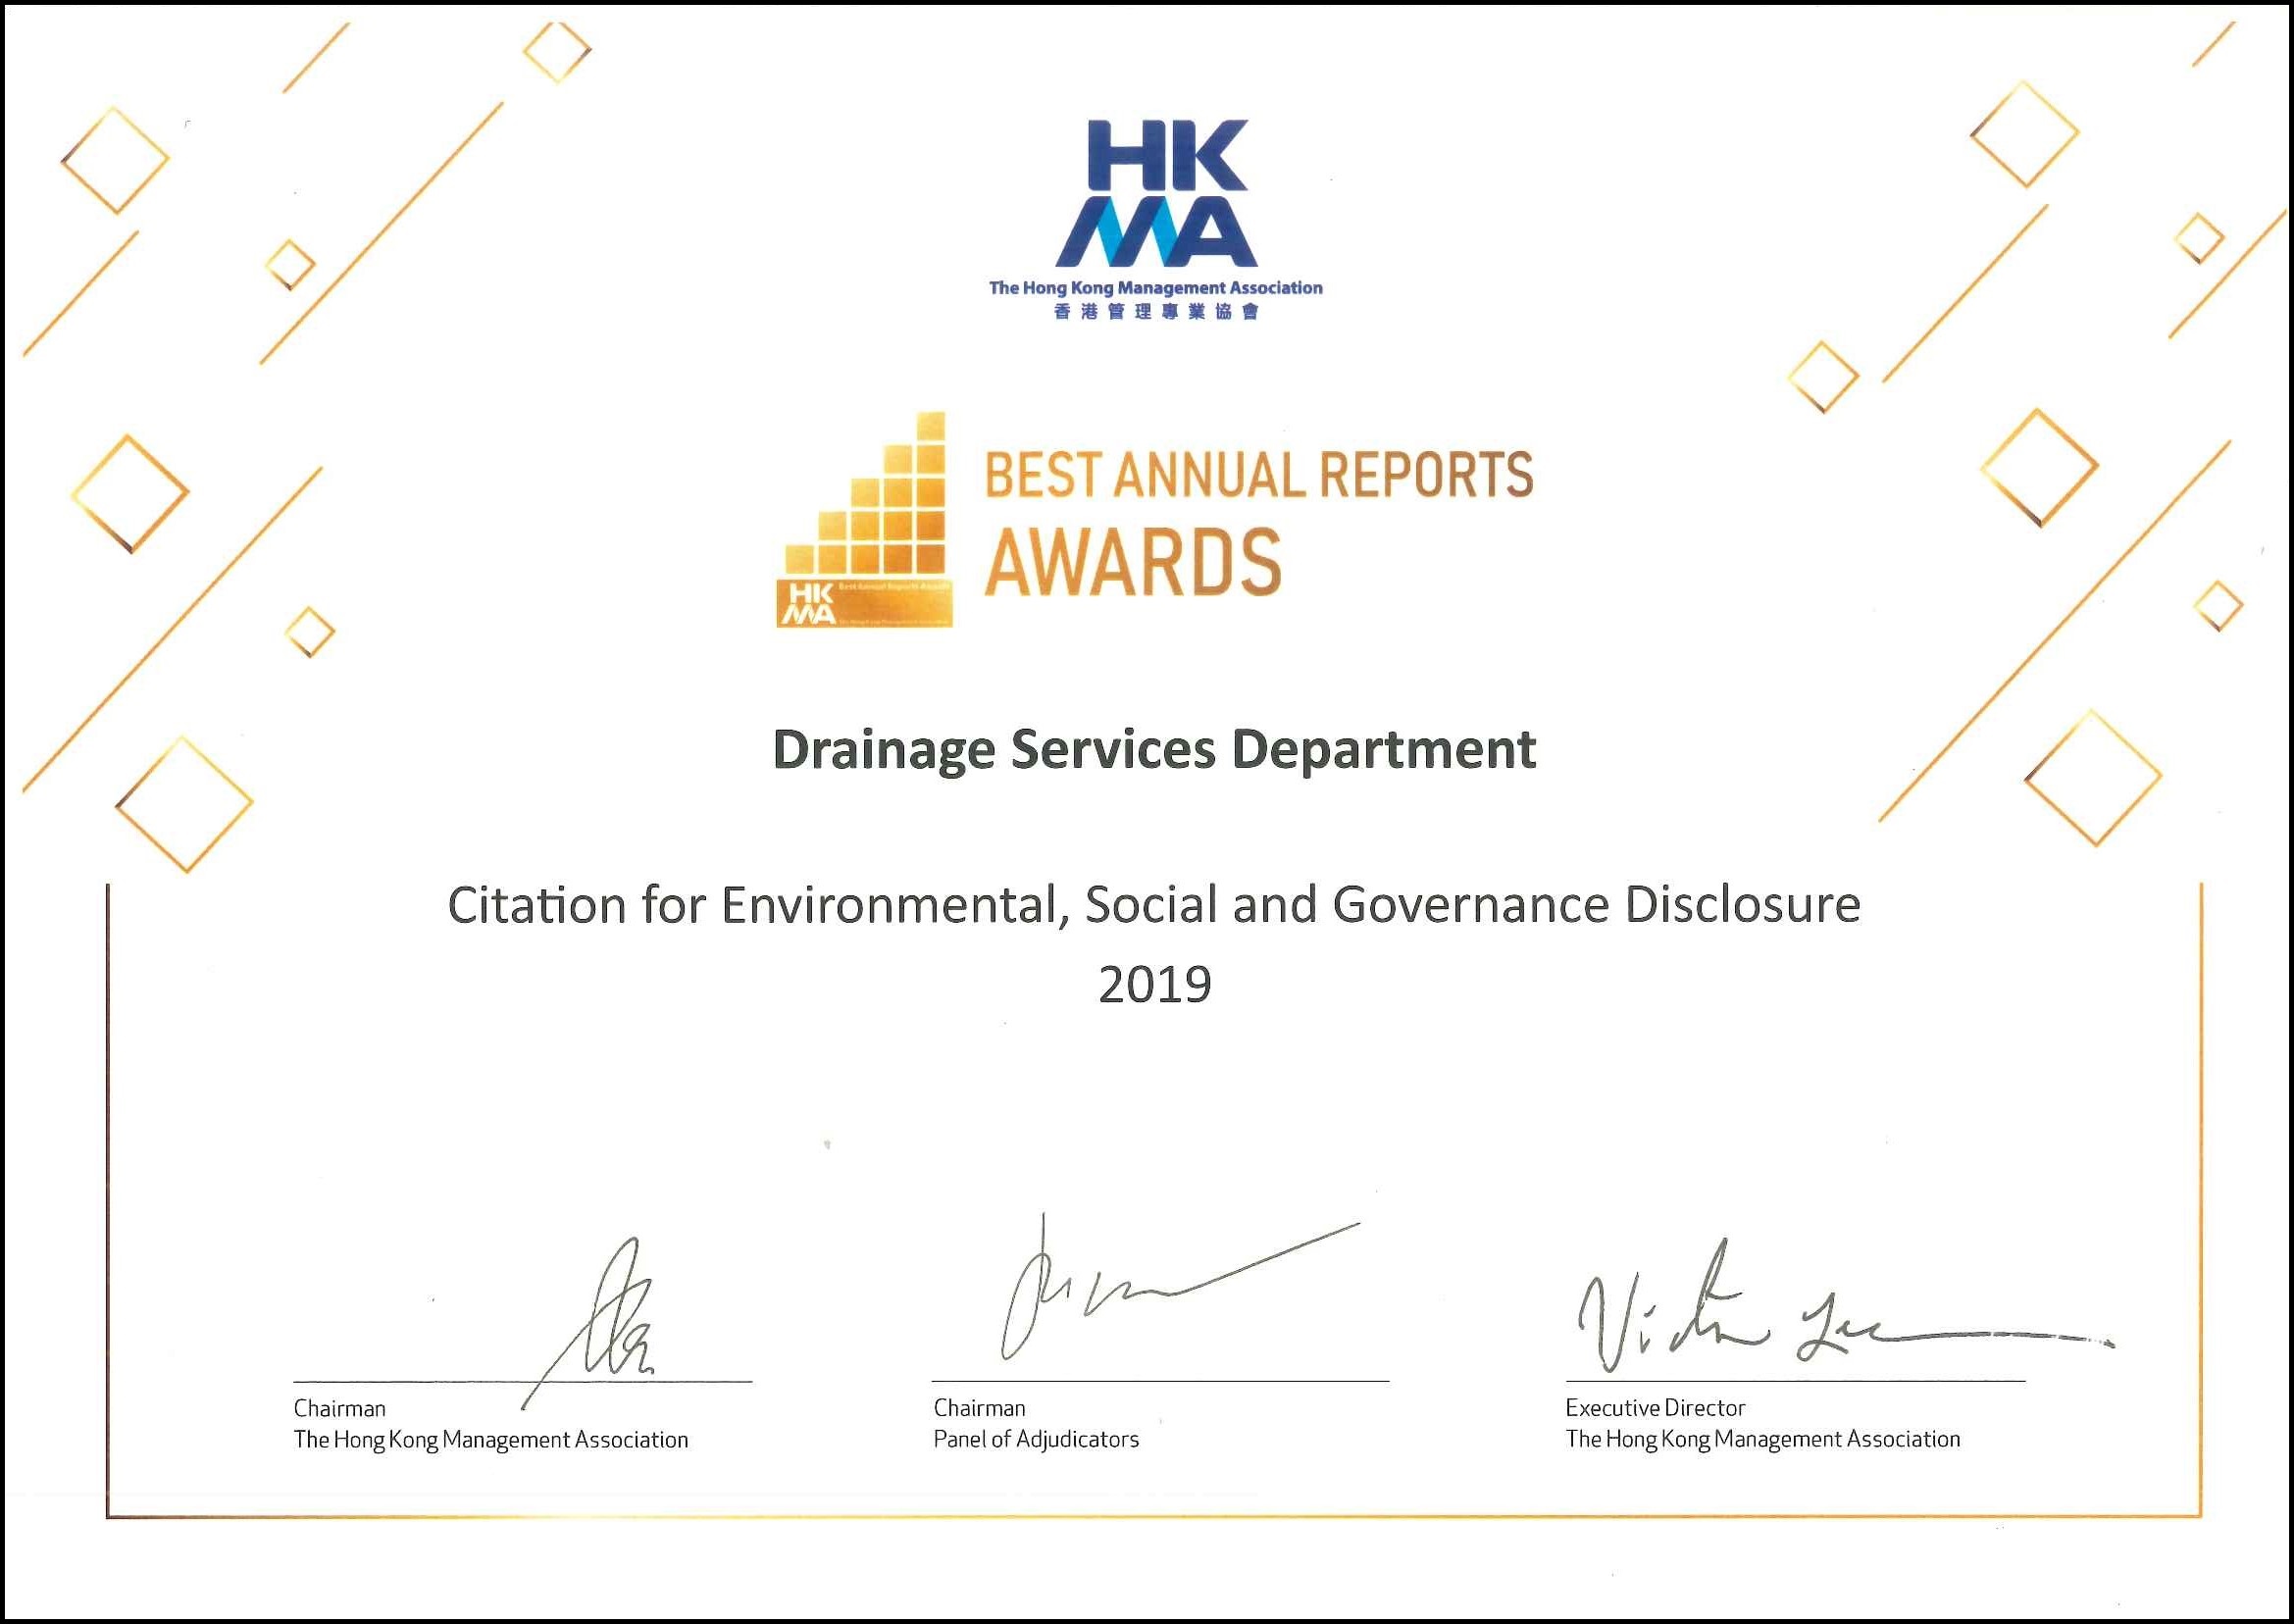 HKMA Best Annual Reports Awards 2019 – Citation for Environmental, Social and Governance Disclosure